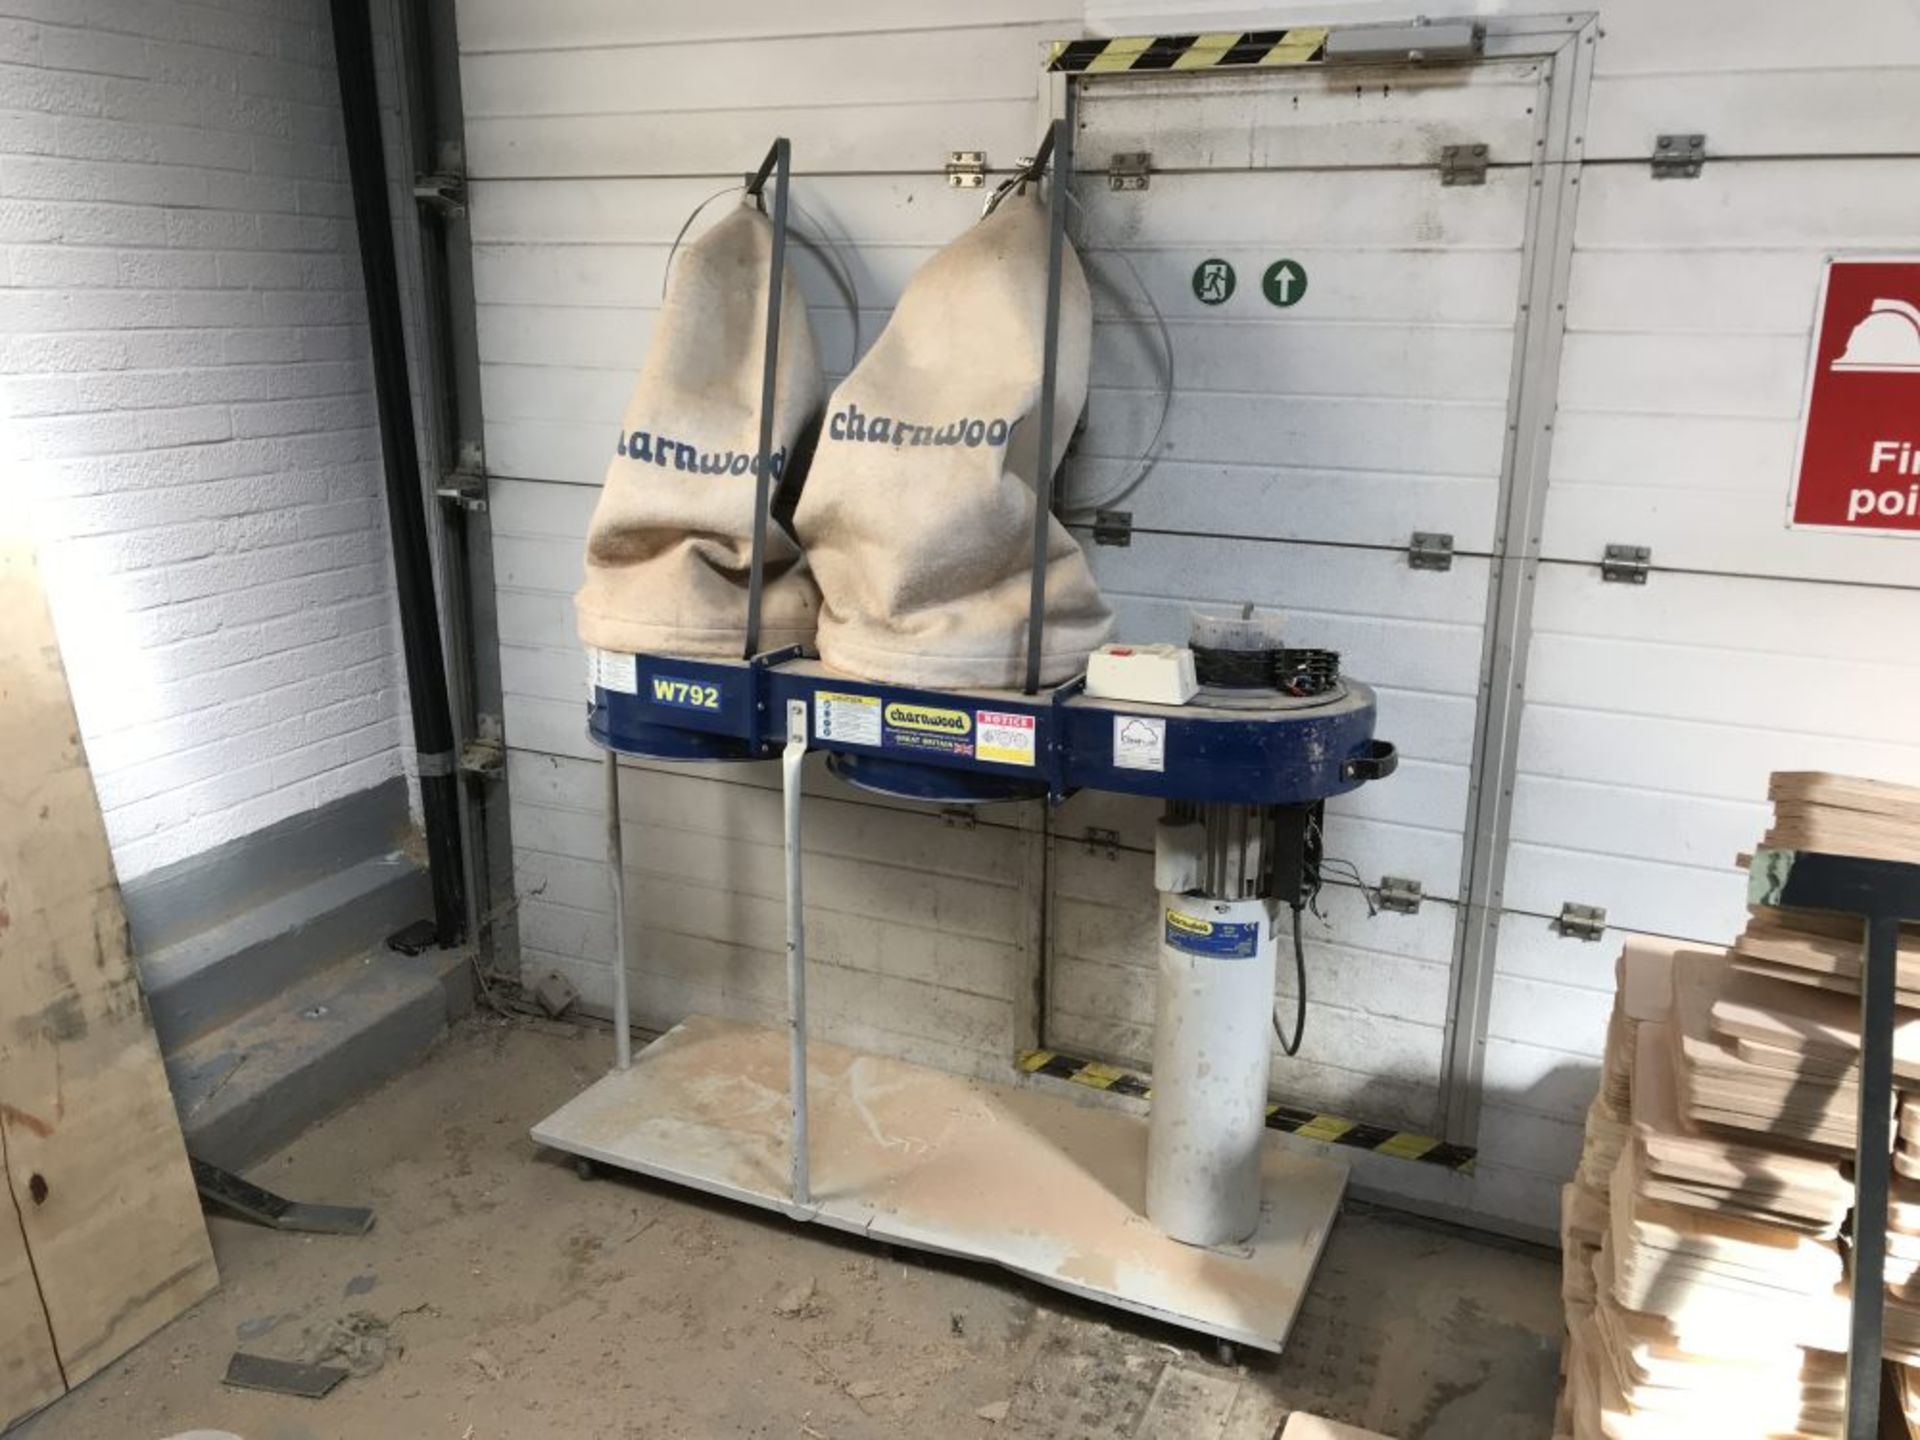 Charnwood W792 double bag dust extractor in need of repair